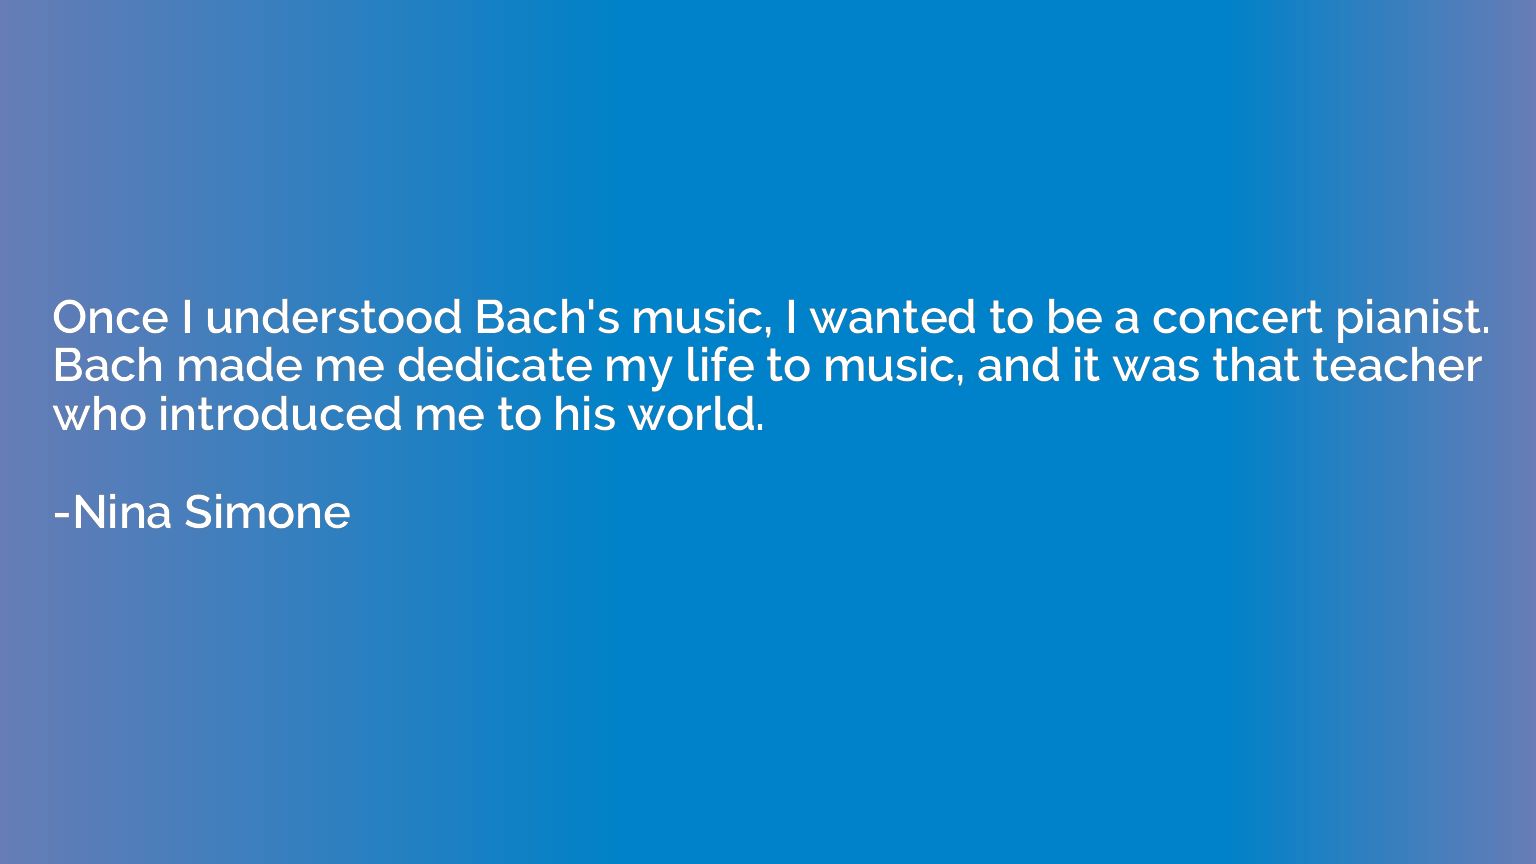 Once I understood Bach's music, I wanted to be a concert pia